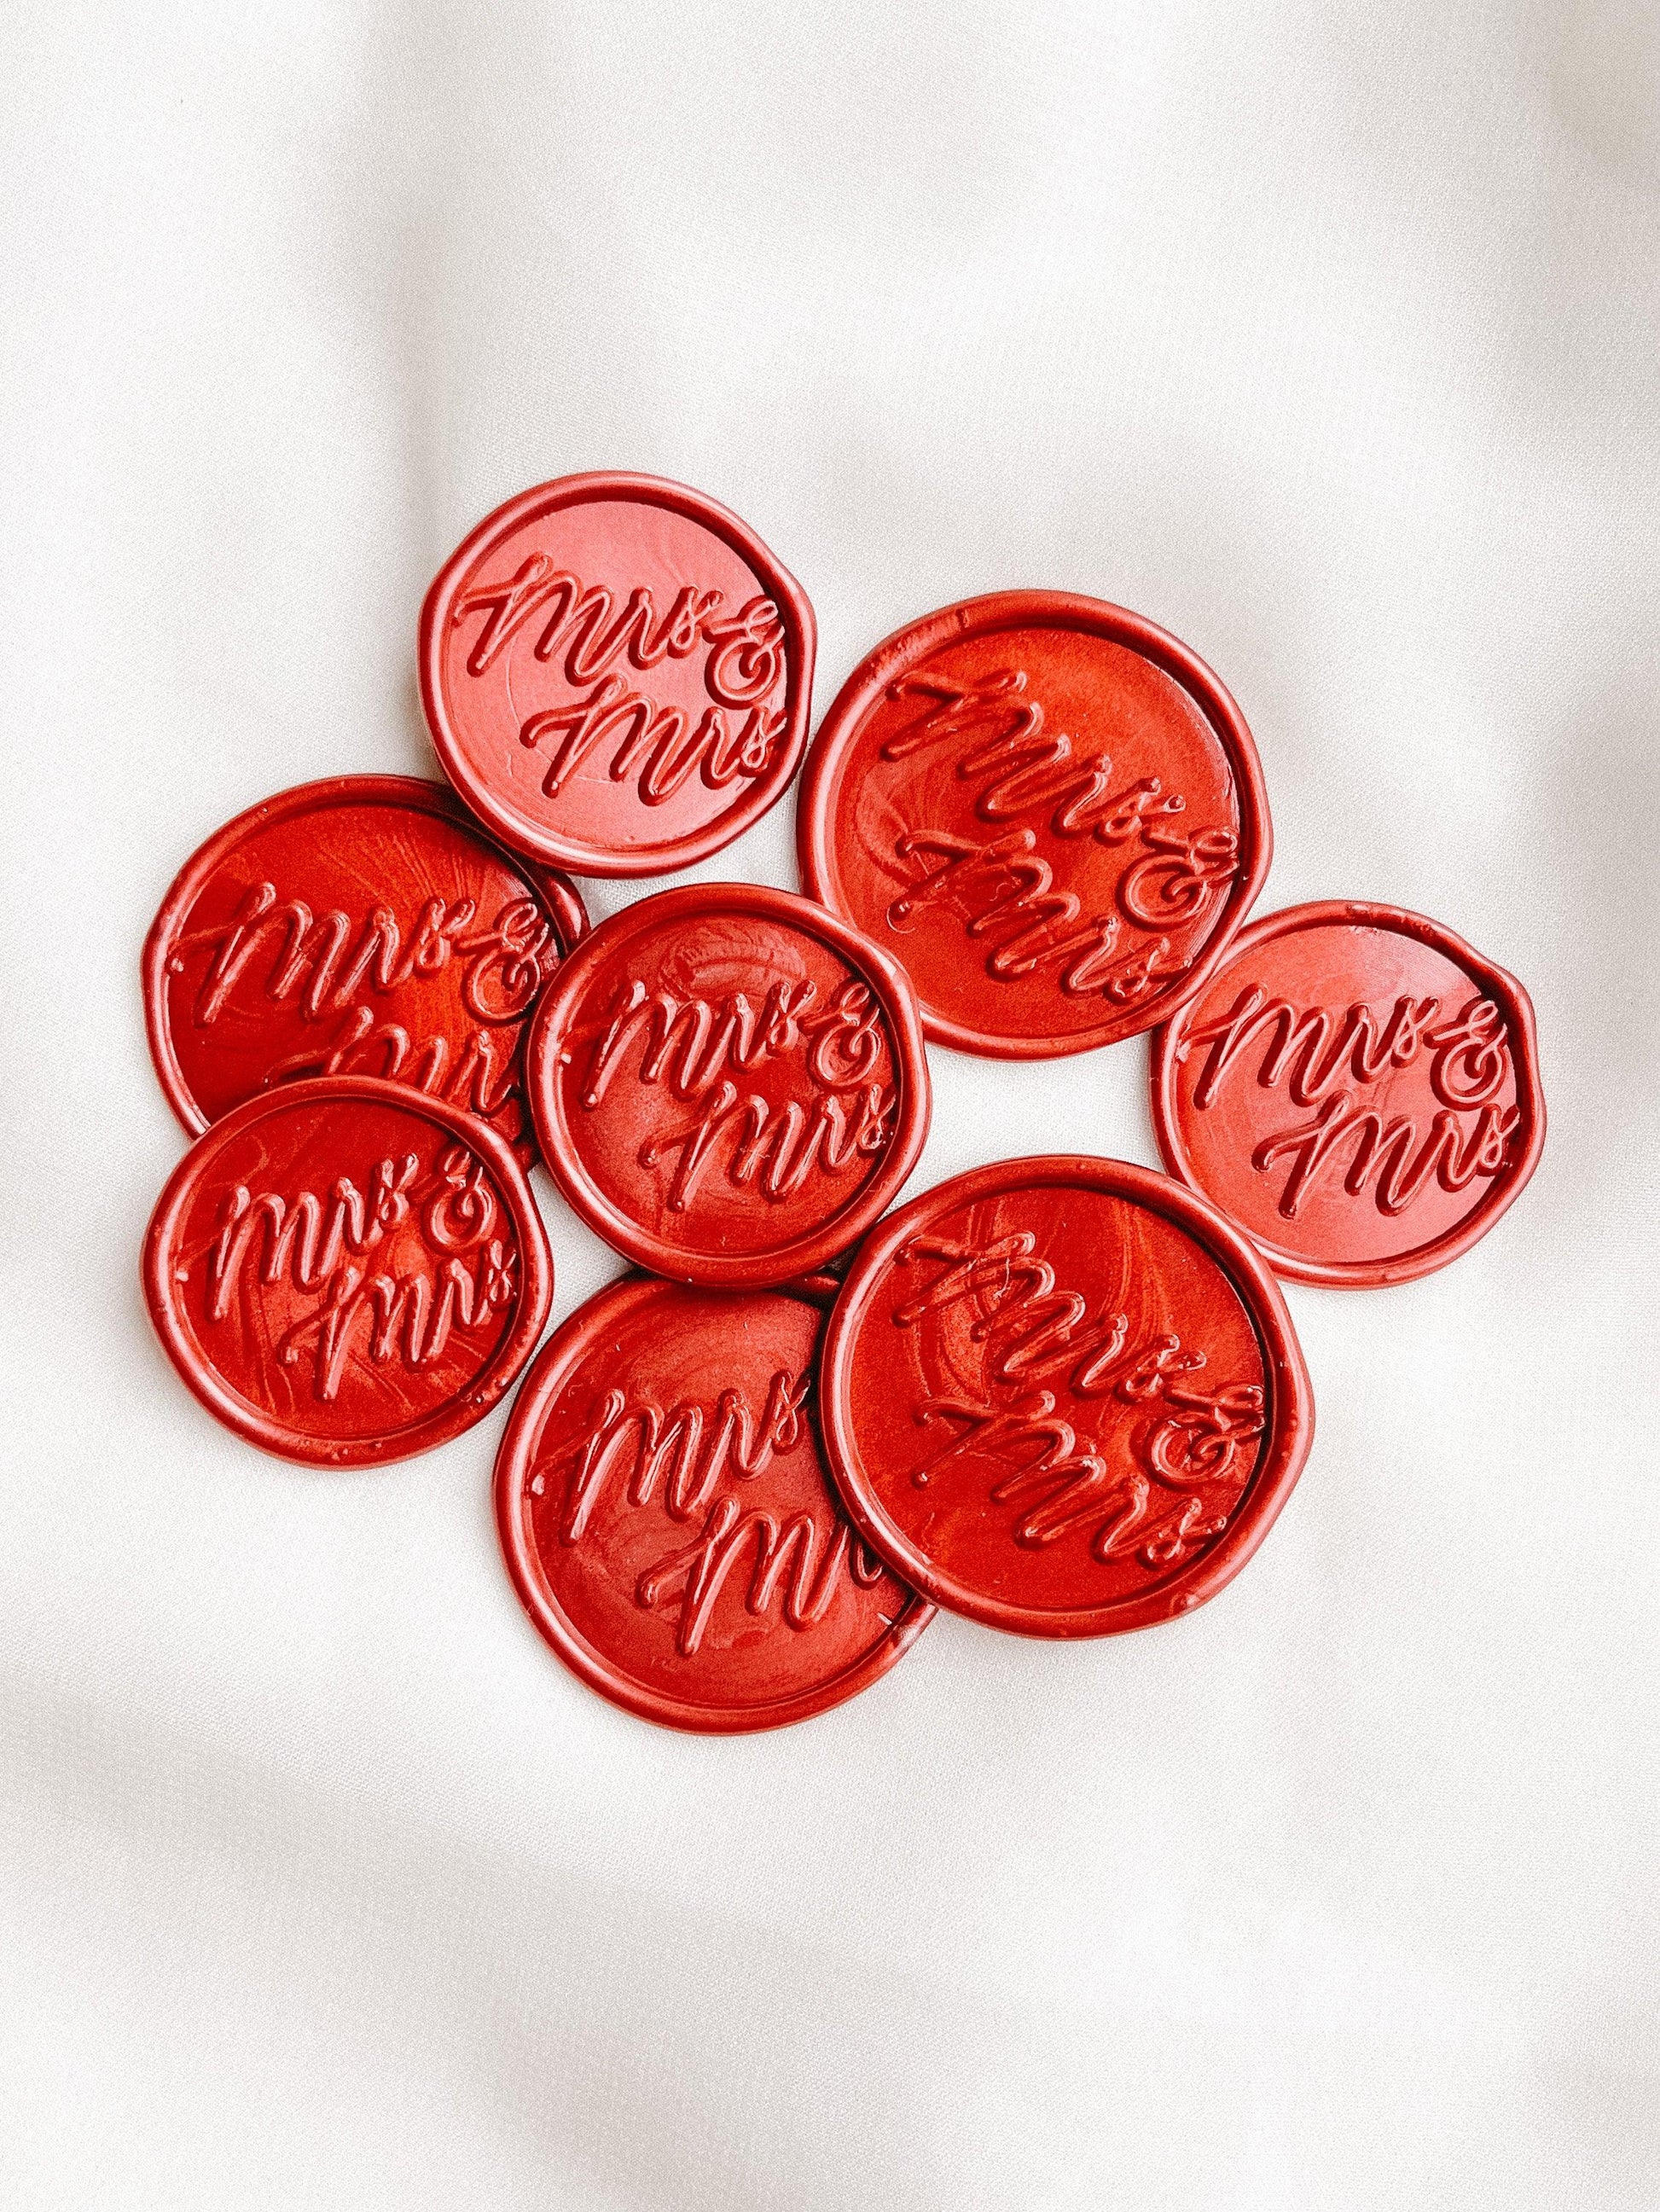 Mrs & Mrs wax seals - Set of 9 - Made of Honour Co.